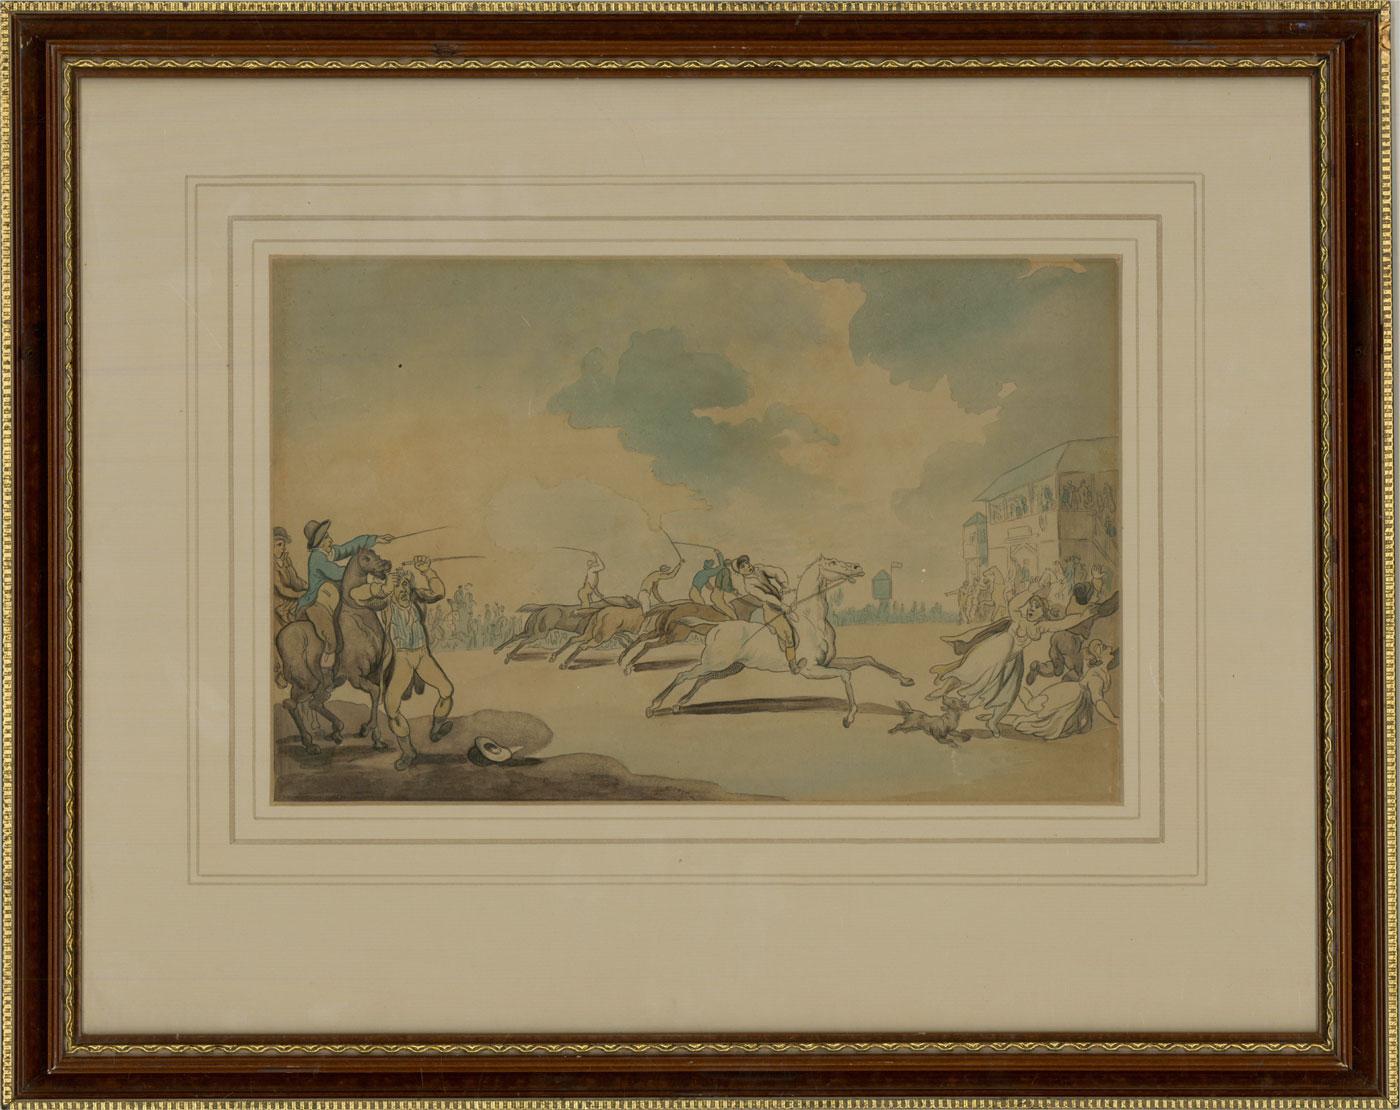 A humorous late Georgian cartoon, showing the chaotic start to a horse race as one of the horses goes out of control and runs into the spectators, sending them fleeing. The scene appears to be a take on the original by Thomas Rowlandson. The